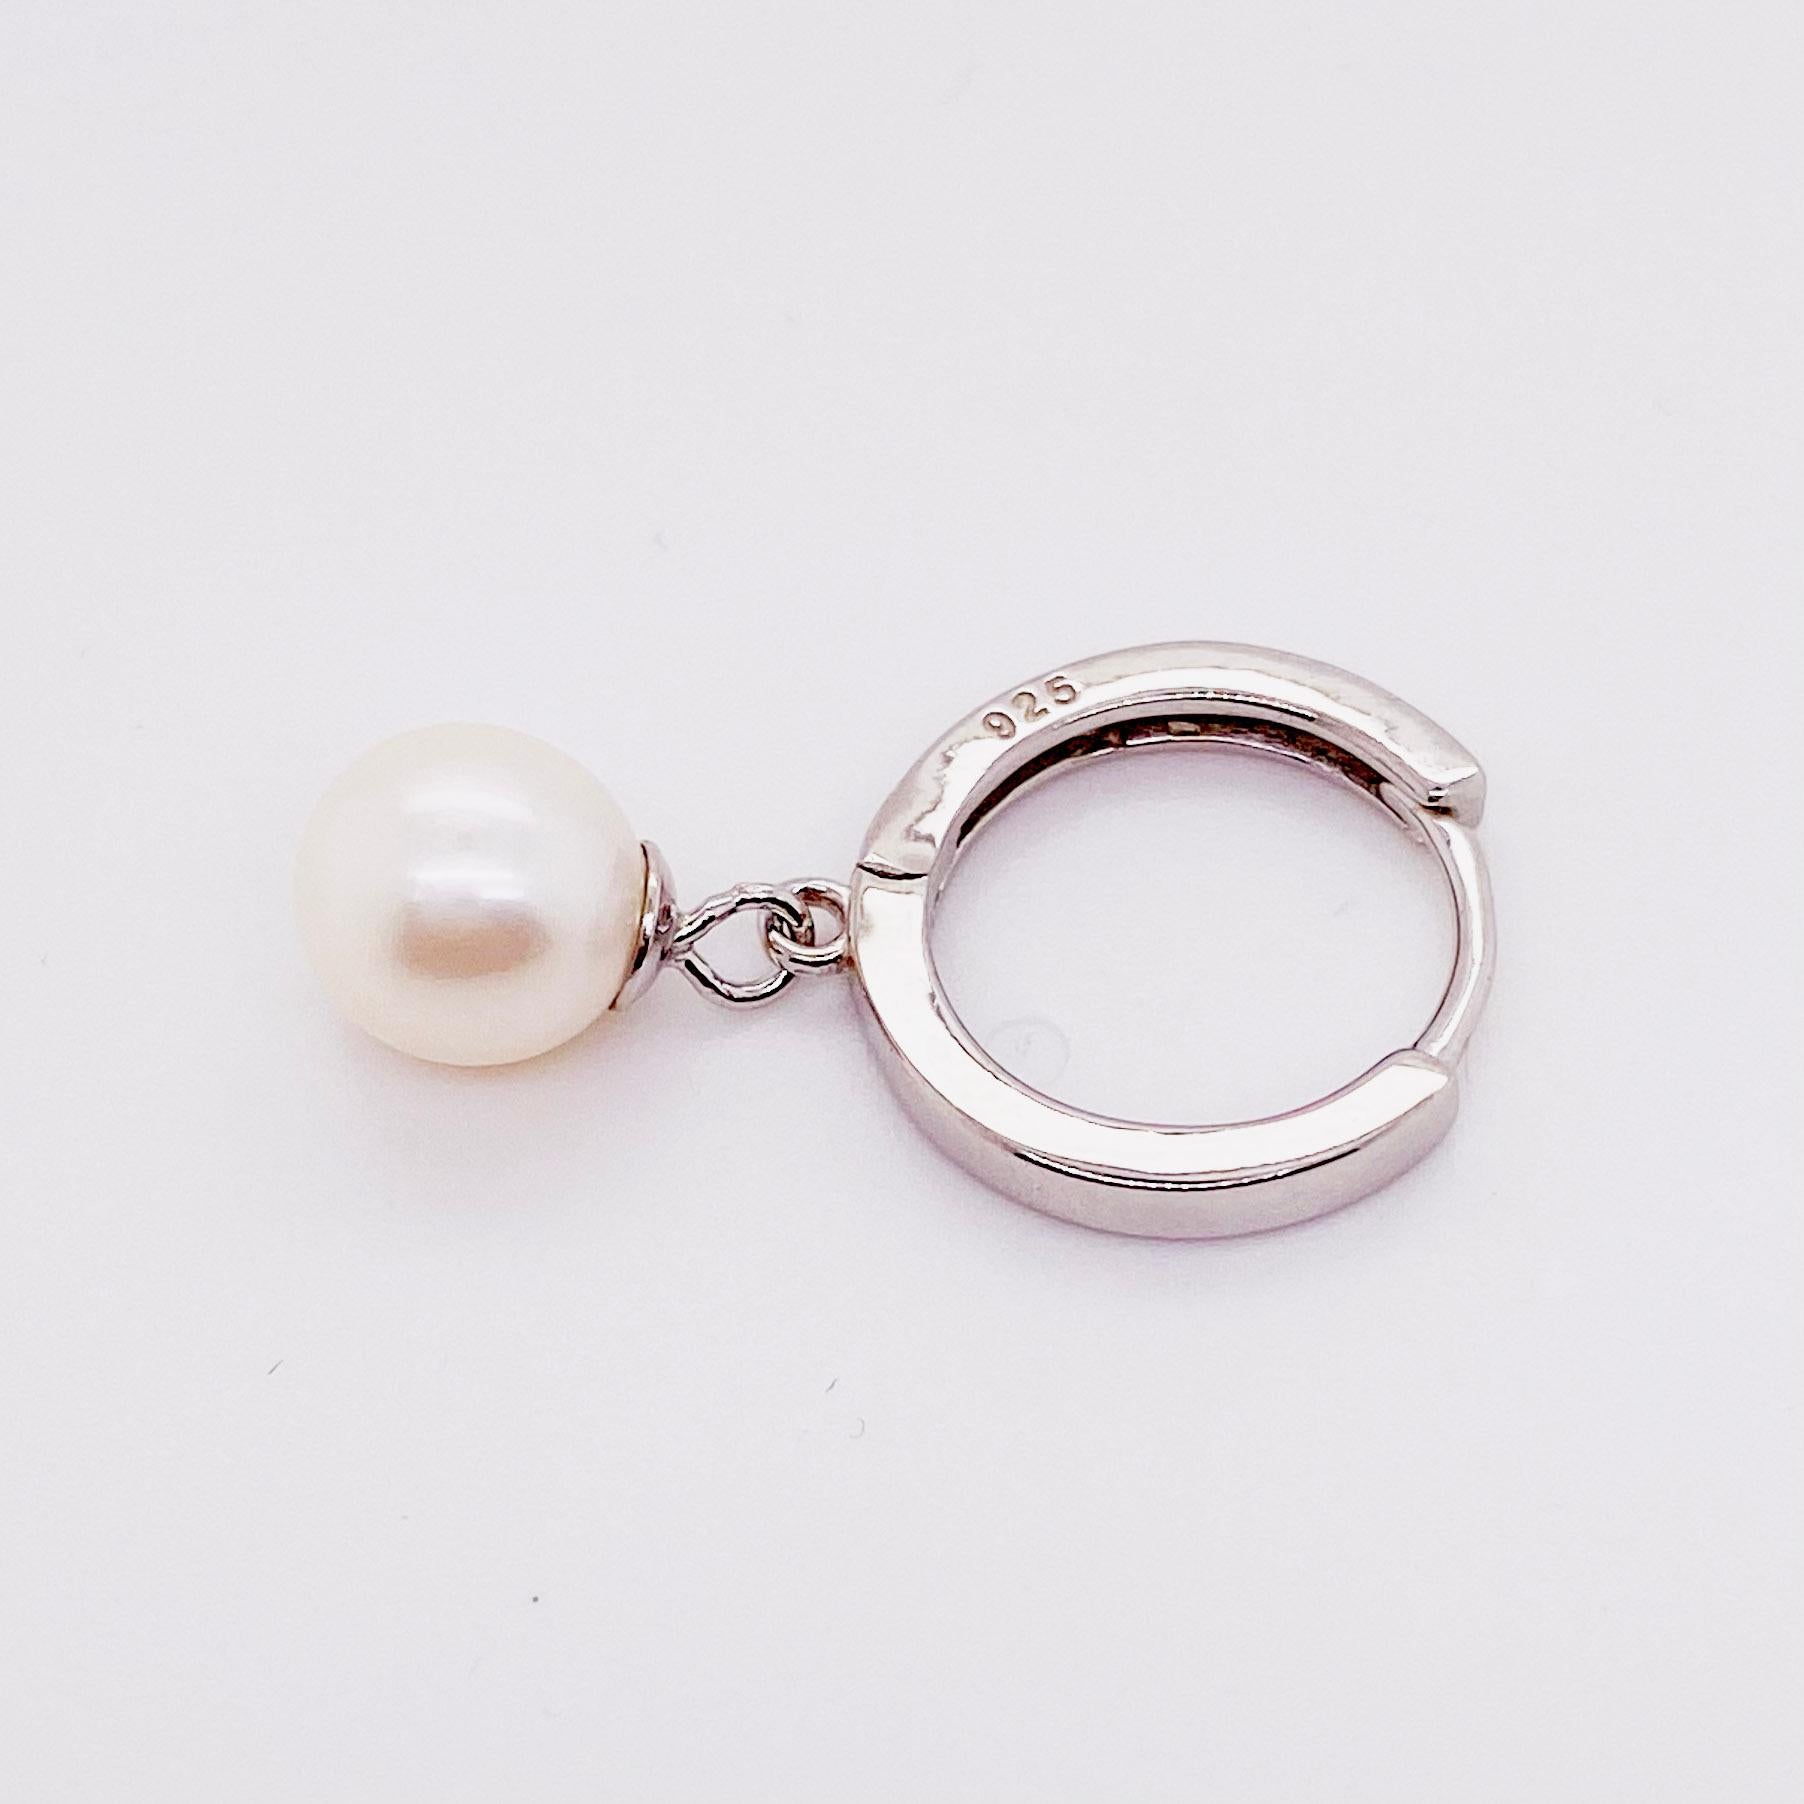 These fresh and fun earrings are  great for any woman! These are a quality design with the sterling silver handmade into lovely huggie earrings. There is a pearl with a cap on the top so that it swings while you are wearing them. These are an